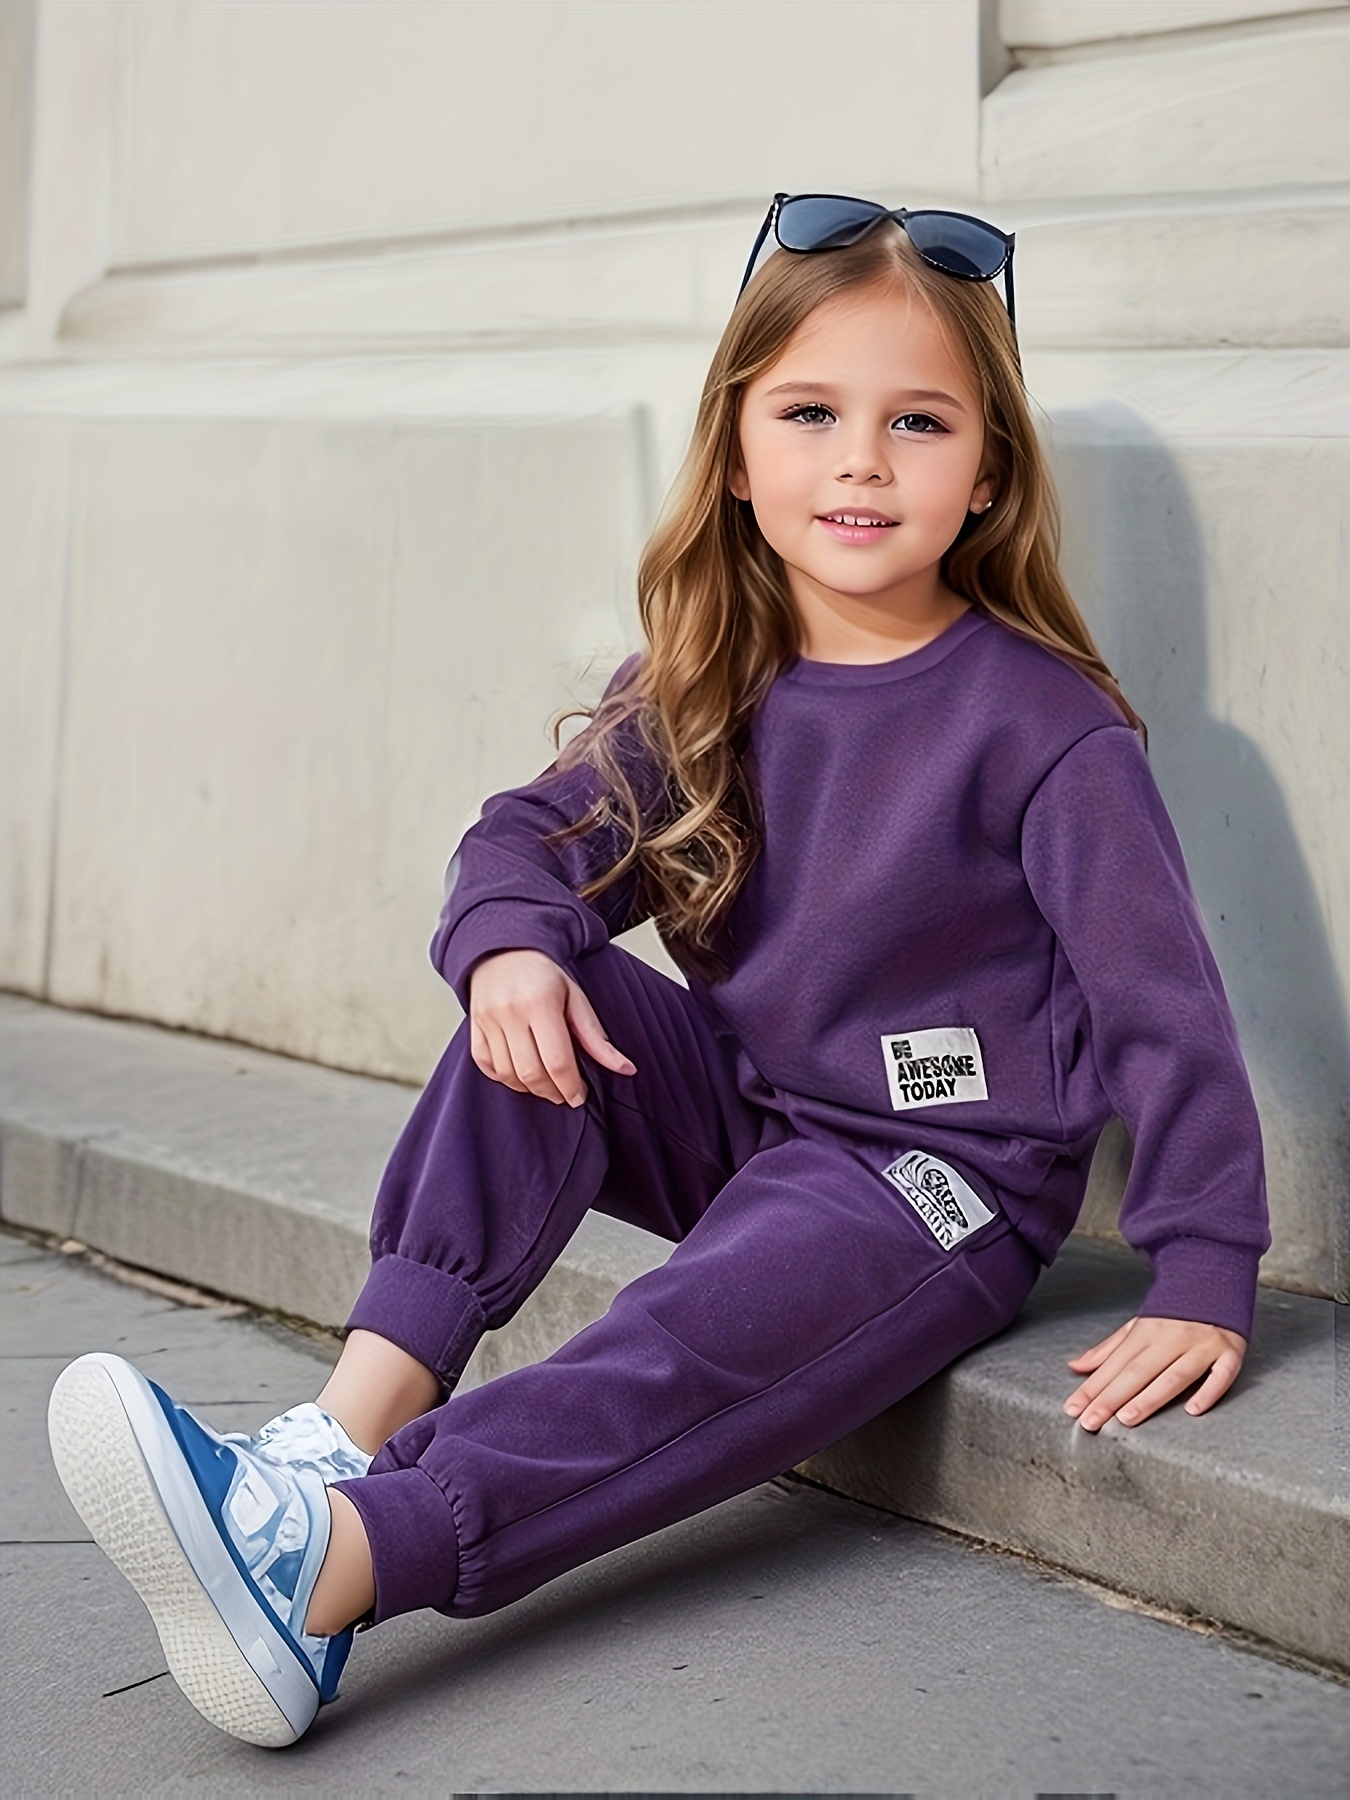 Girls Clothes ''Be Awesome Today'' Fashion Patch Long Sleeve Sweatshirt And  Pants Set, Kids Sports Leisure Suit For Spring/ Fall